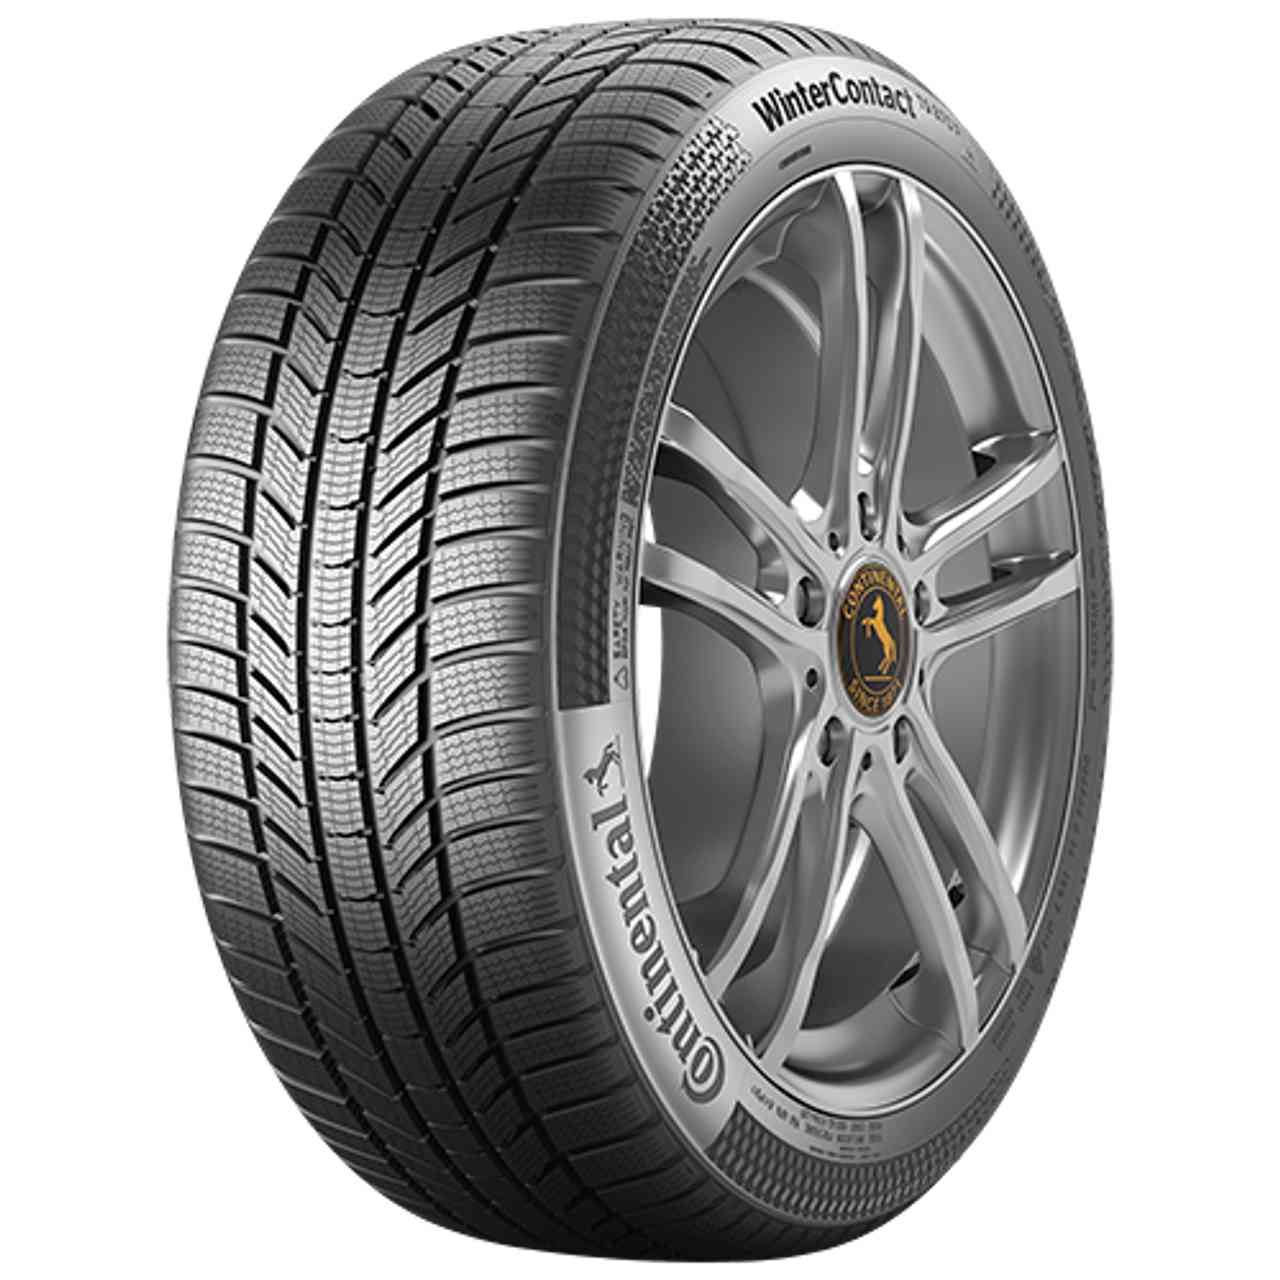 CONTINENTAL WINTERCONTACT TS 870 P (EVc) 235/45R21 101T FR BSW